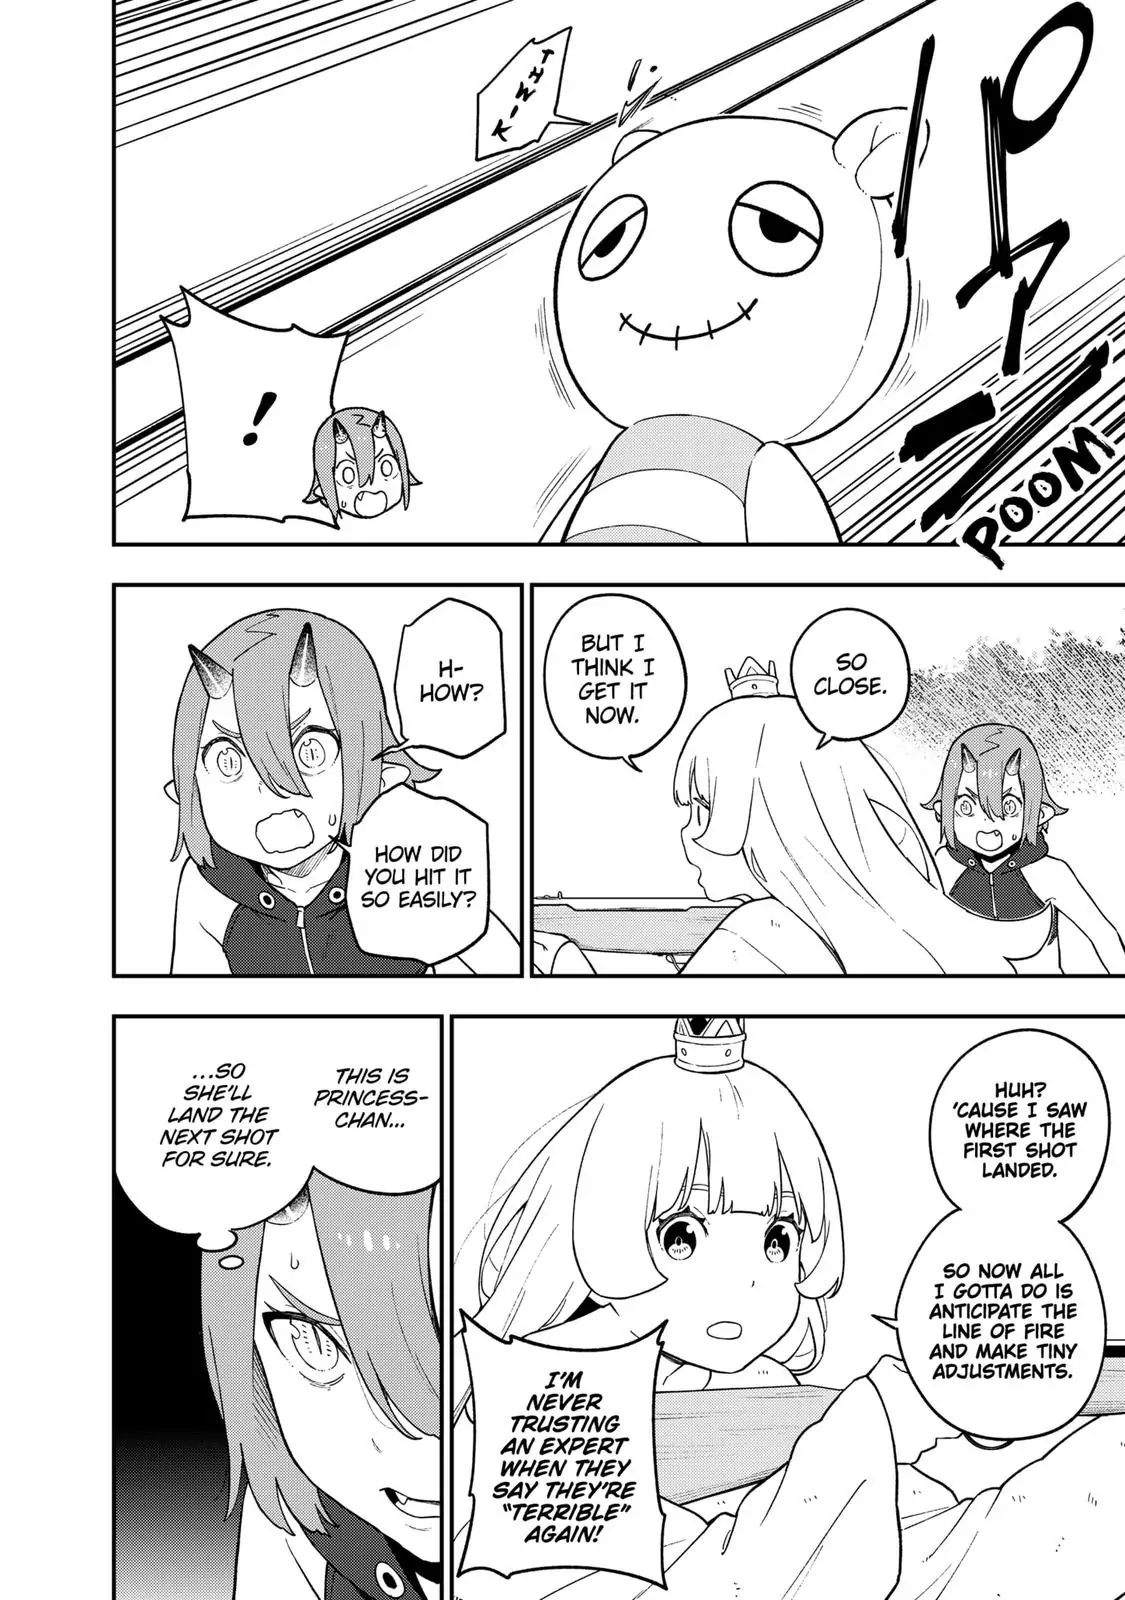 It's Time for "Interrogation", Princess! - chapter 156 - #6